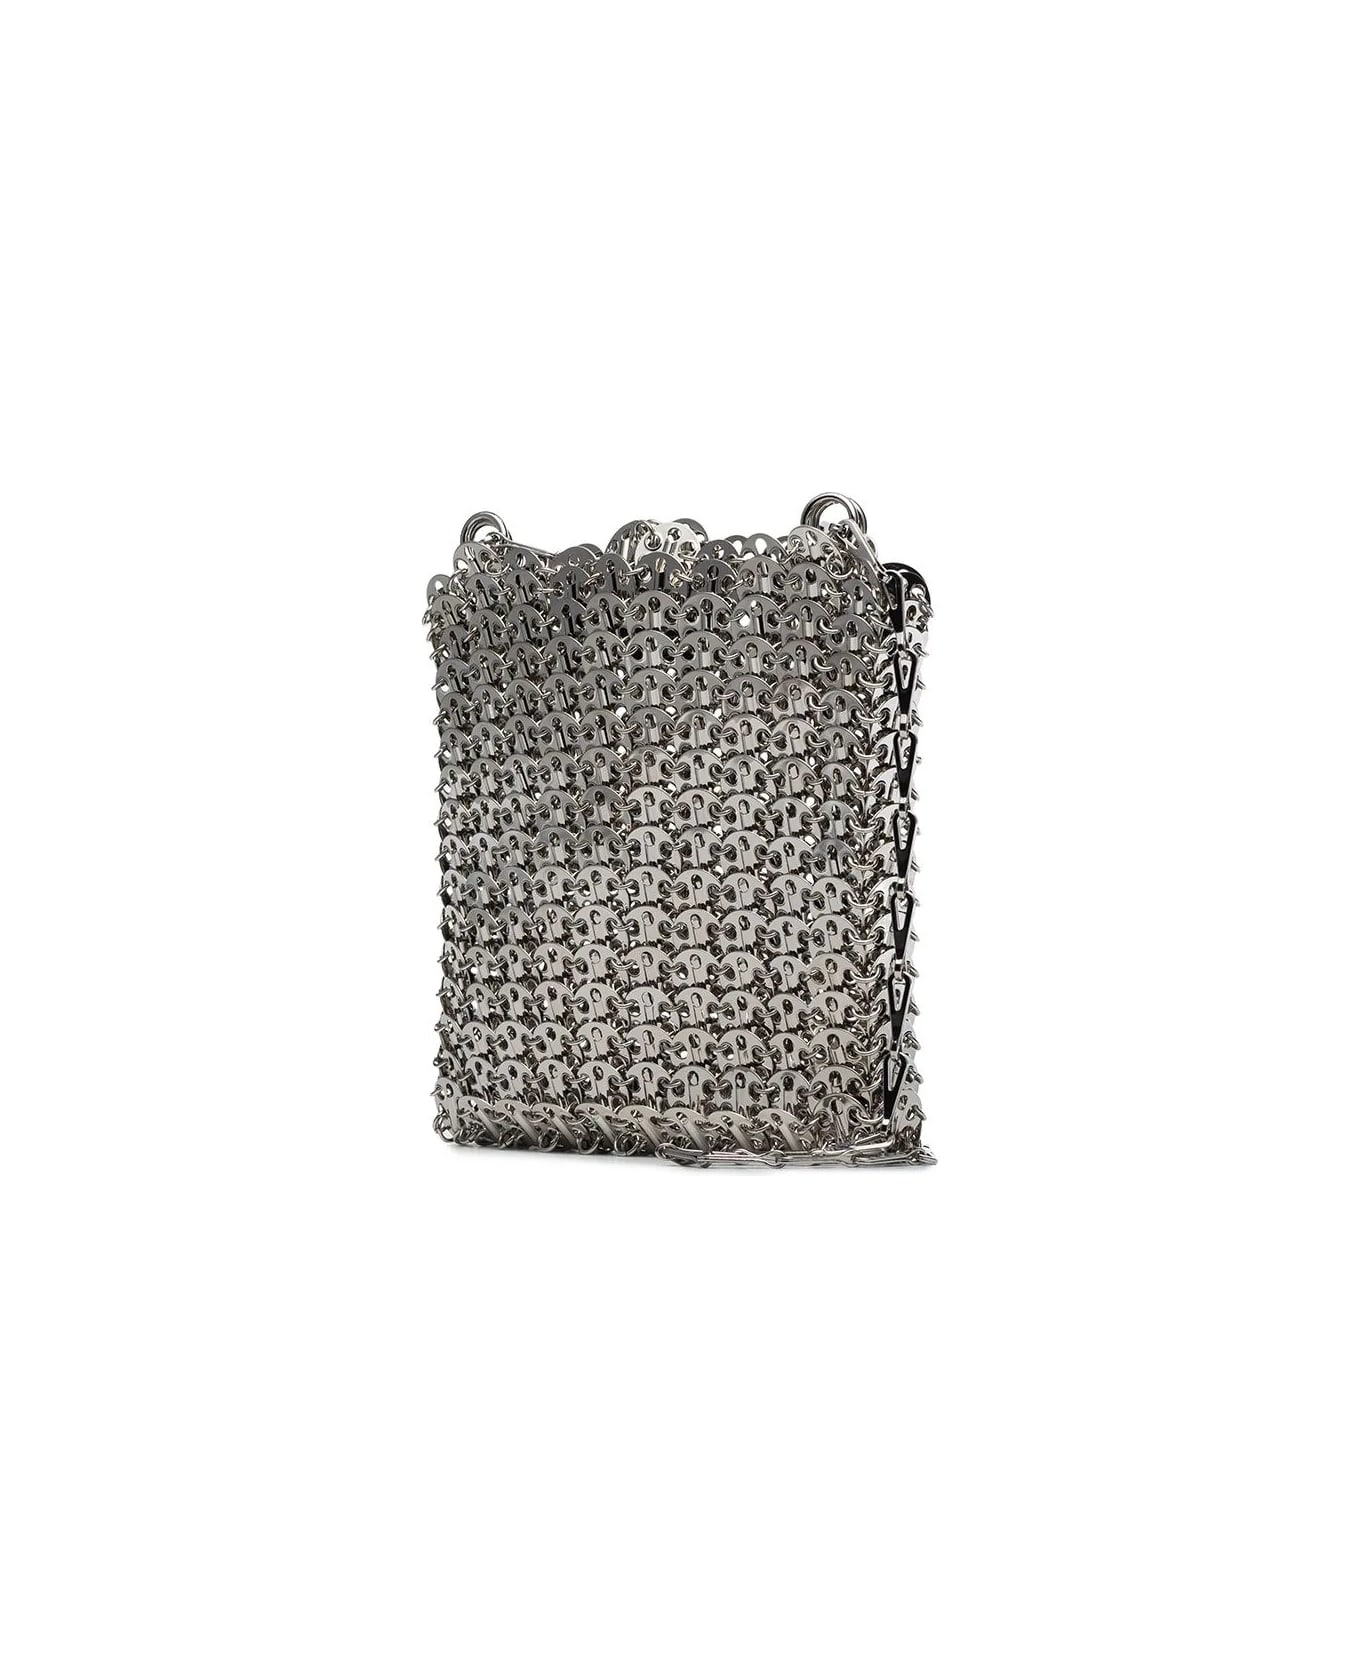 Paco Rabanne Iconic 1969 Shoulder Bag In Silver - Silver